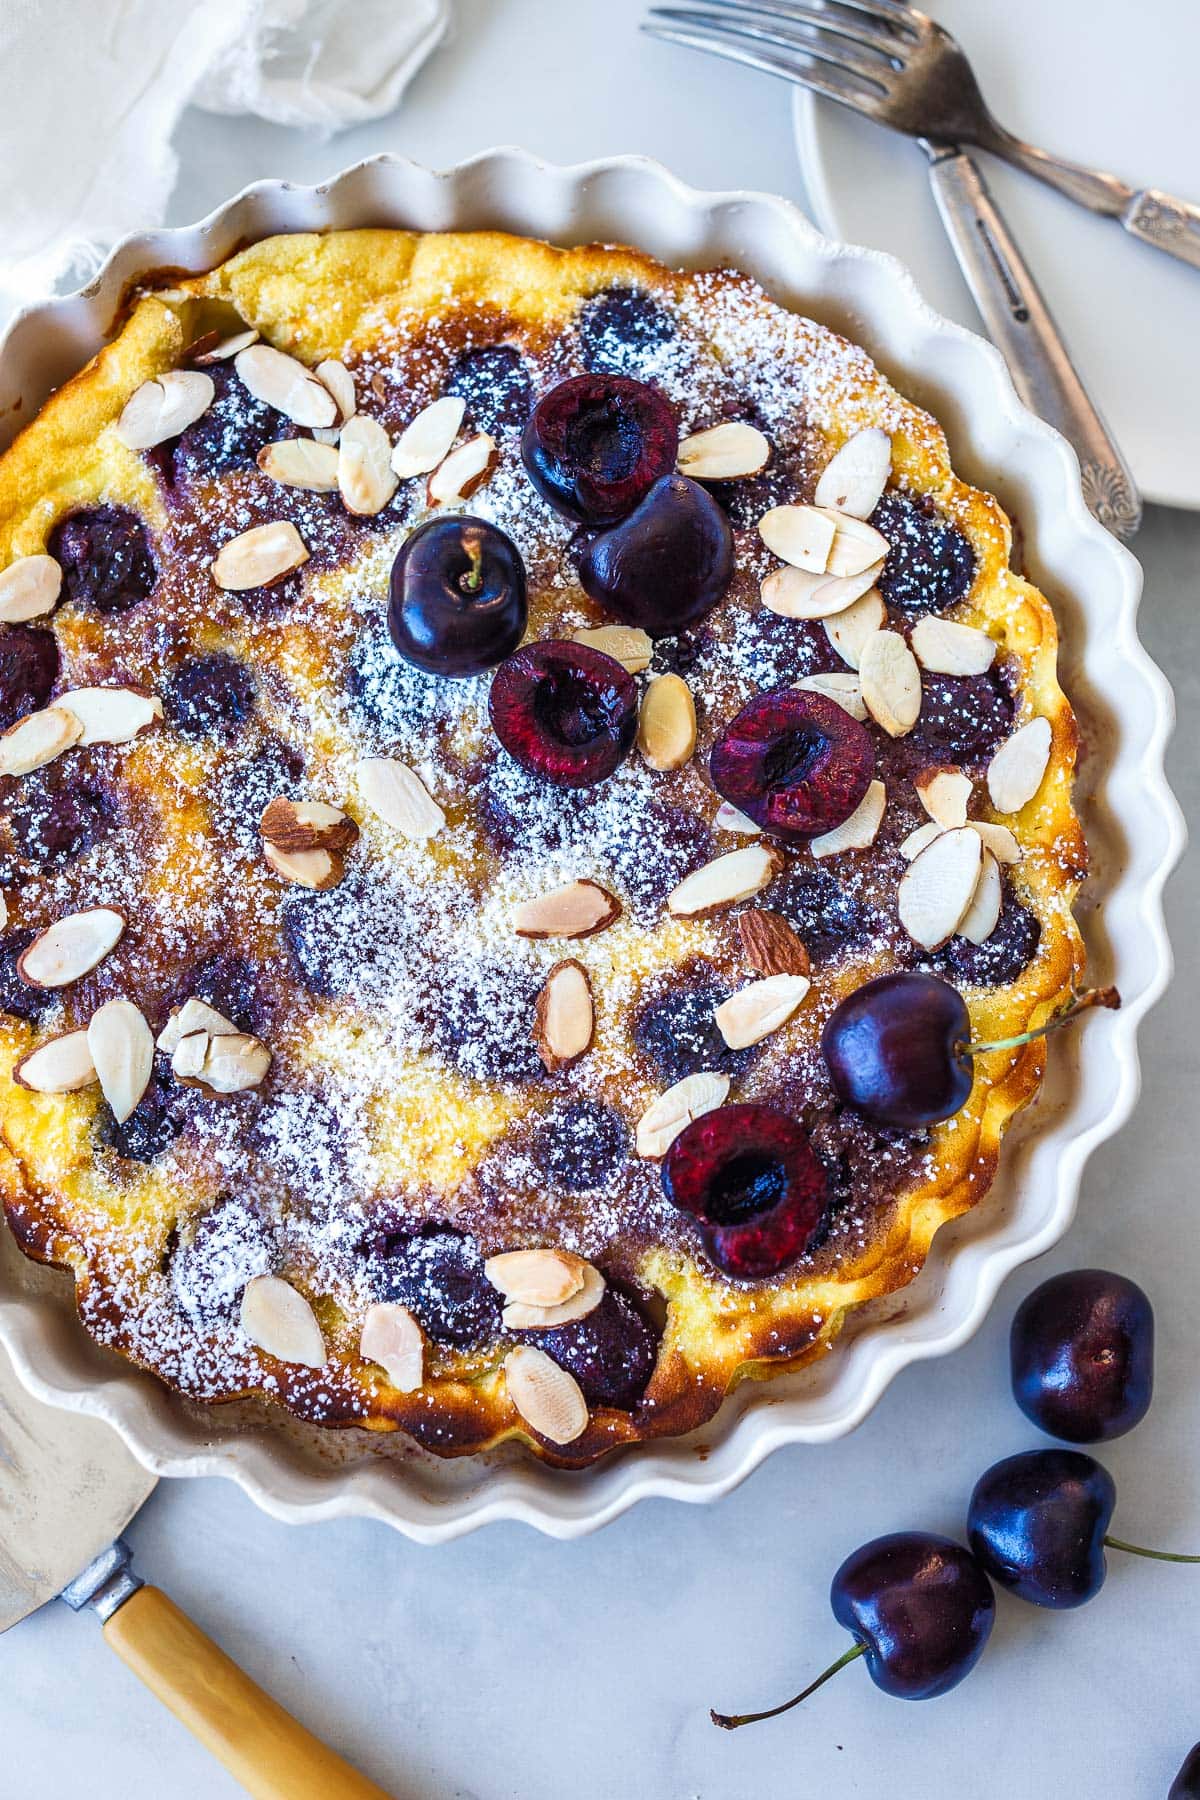 A classic French dessert, this easy Cherry Clafoutis recipe combines ripe cherries with a tender simple batter for a delightful treat. Perfect for any occasion, it impresses with its delicate custardy texture and sweet, tart flavor. Gluten-free adaptable.